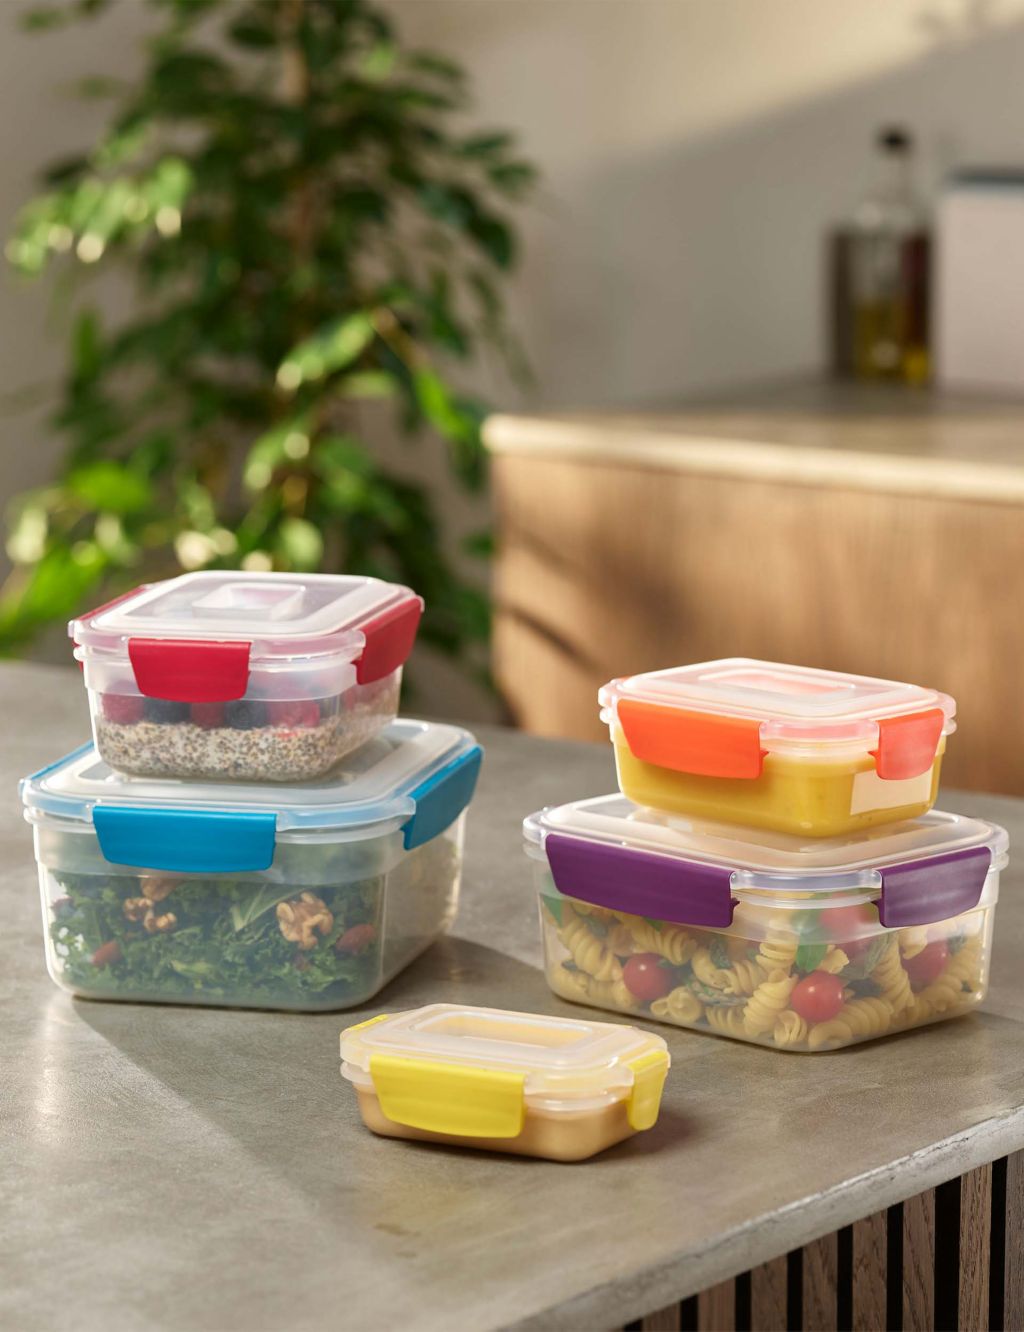 Set of 5 Nest Lock Storage Containers image 2